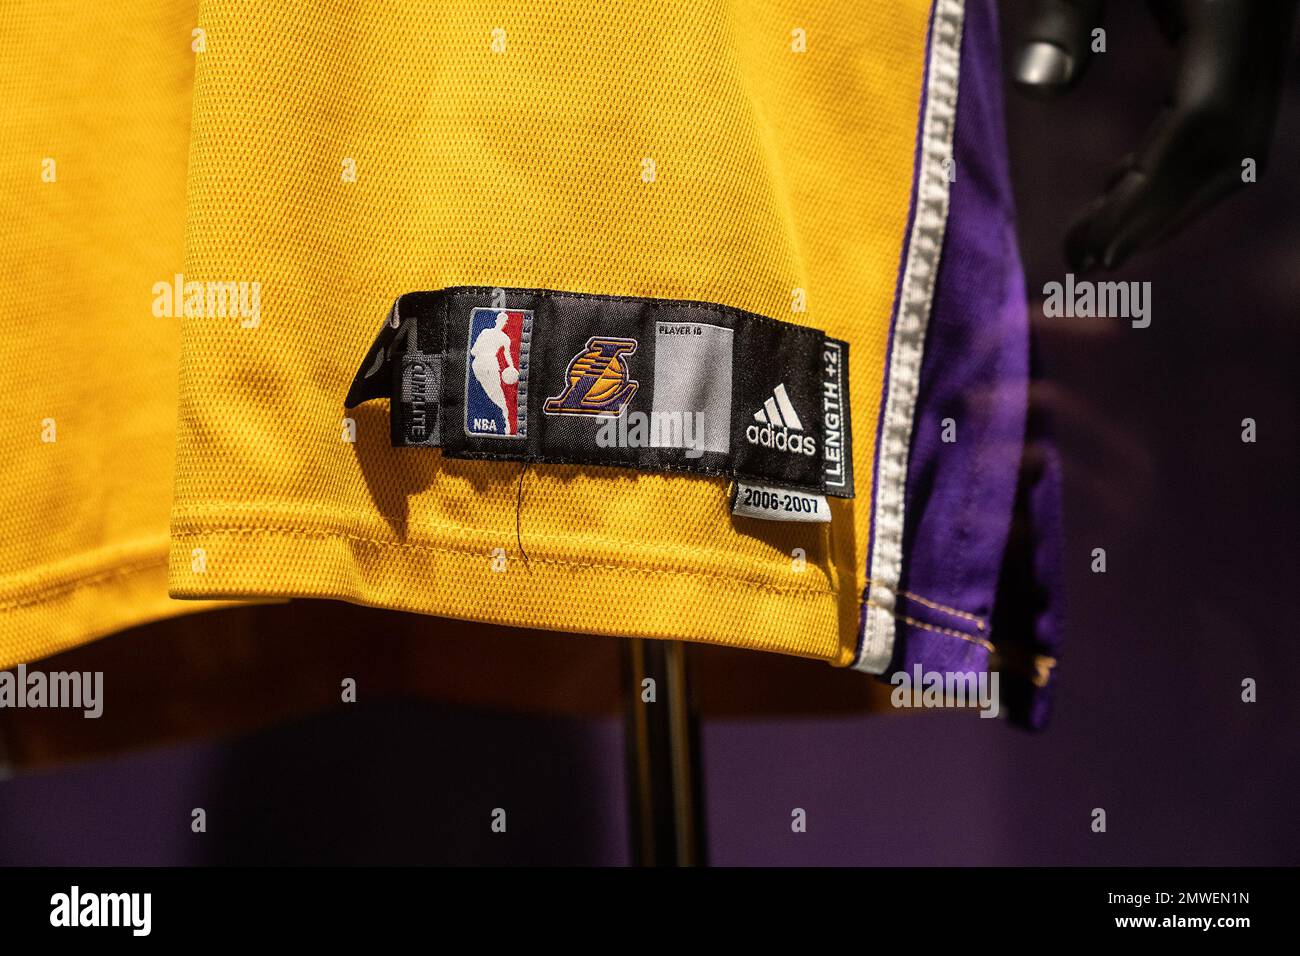 adidas, Other, Adidas Kobe Bryant Jersey Black Gray Purple And Yellow On  The Side